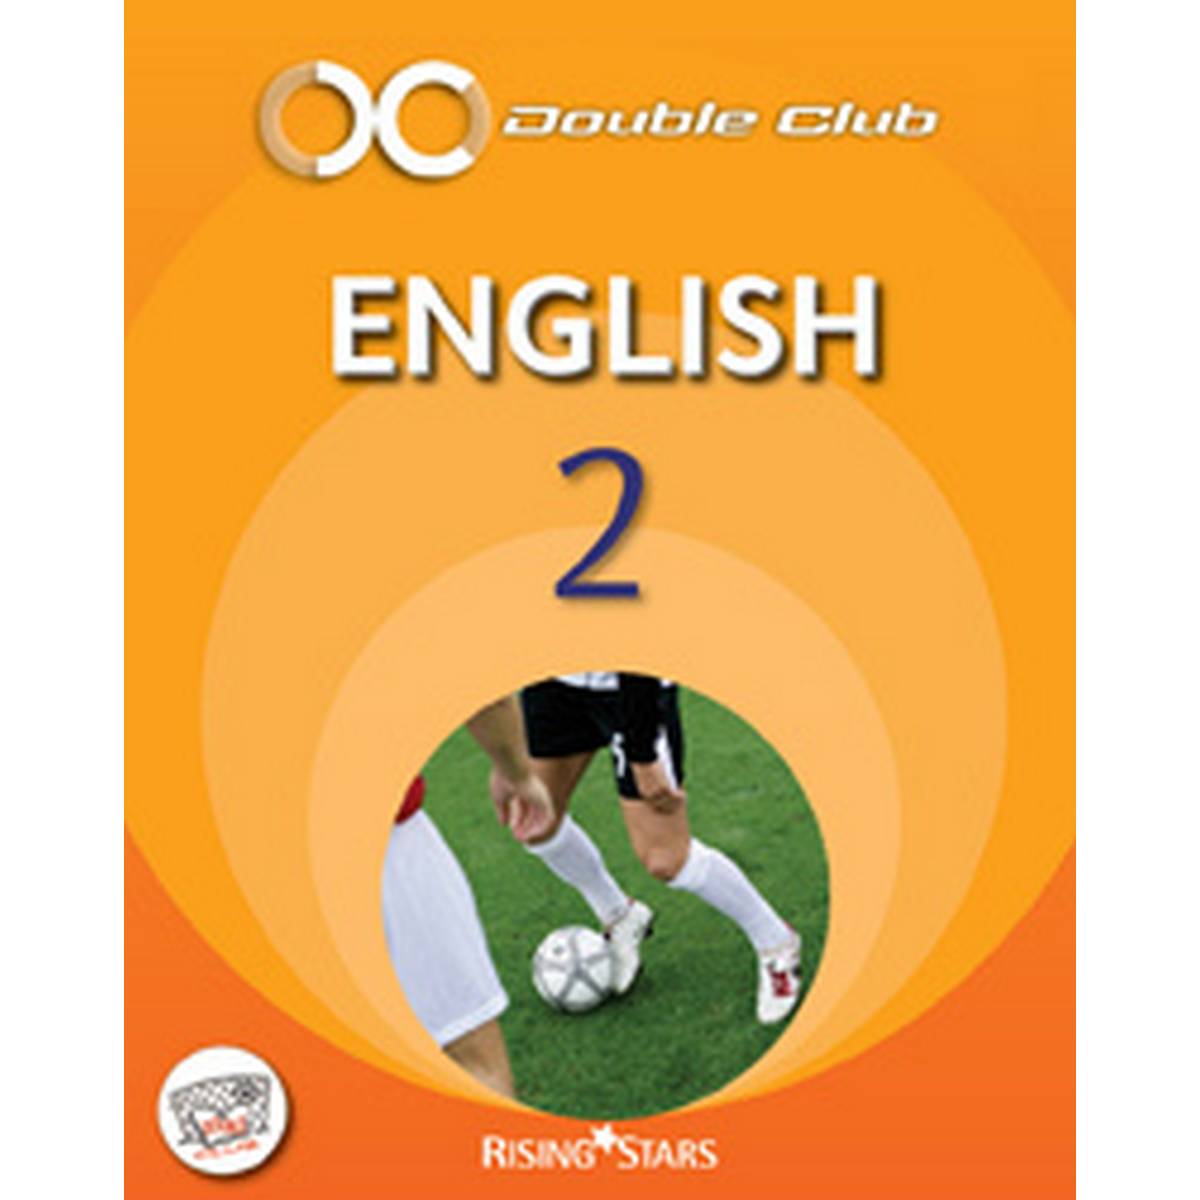 Double Club English Pupil Book 2